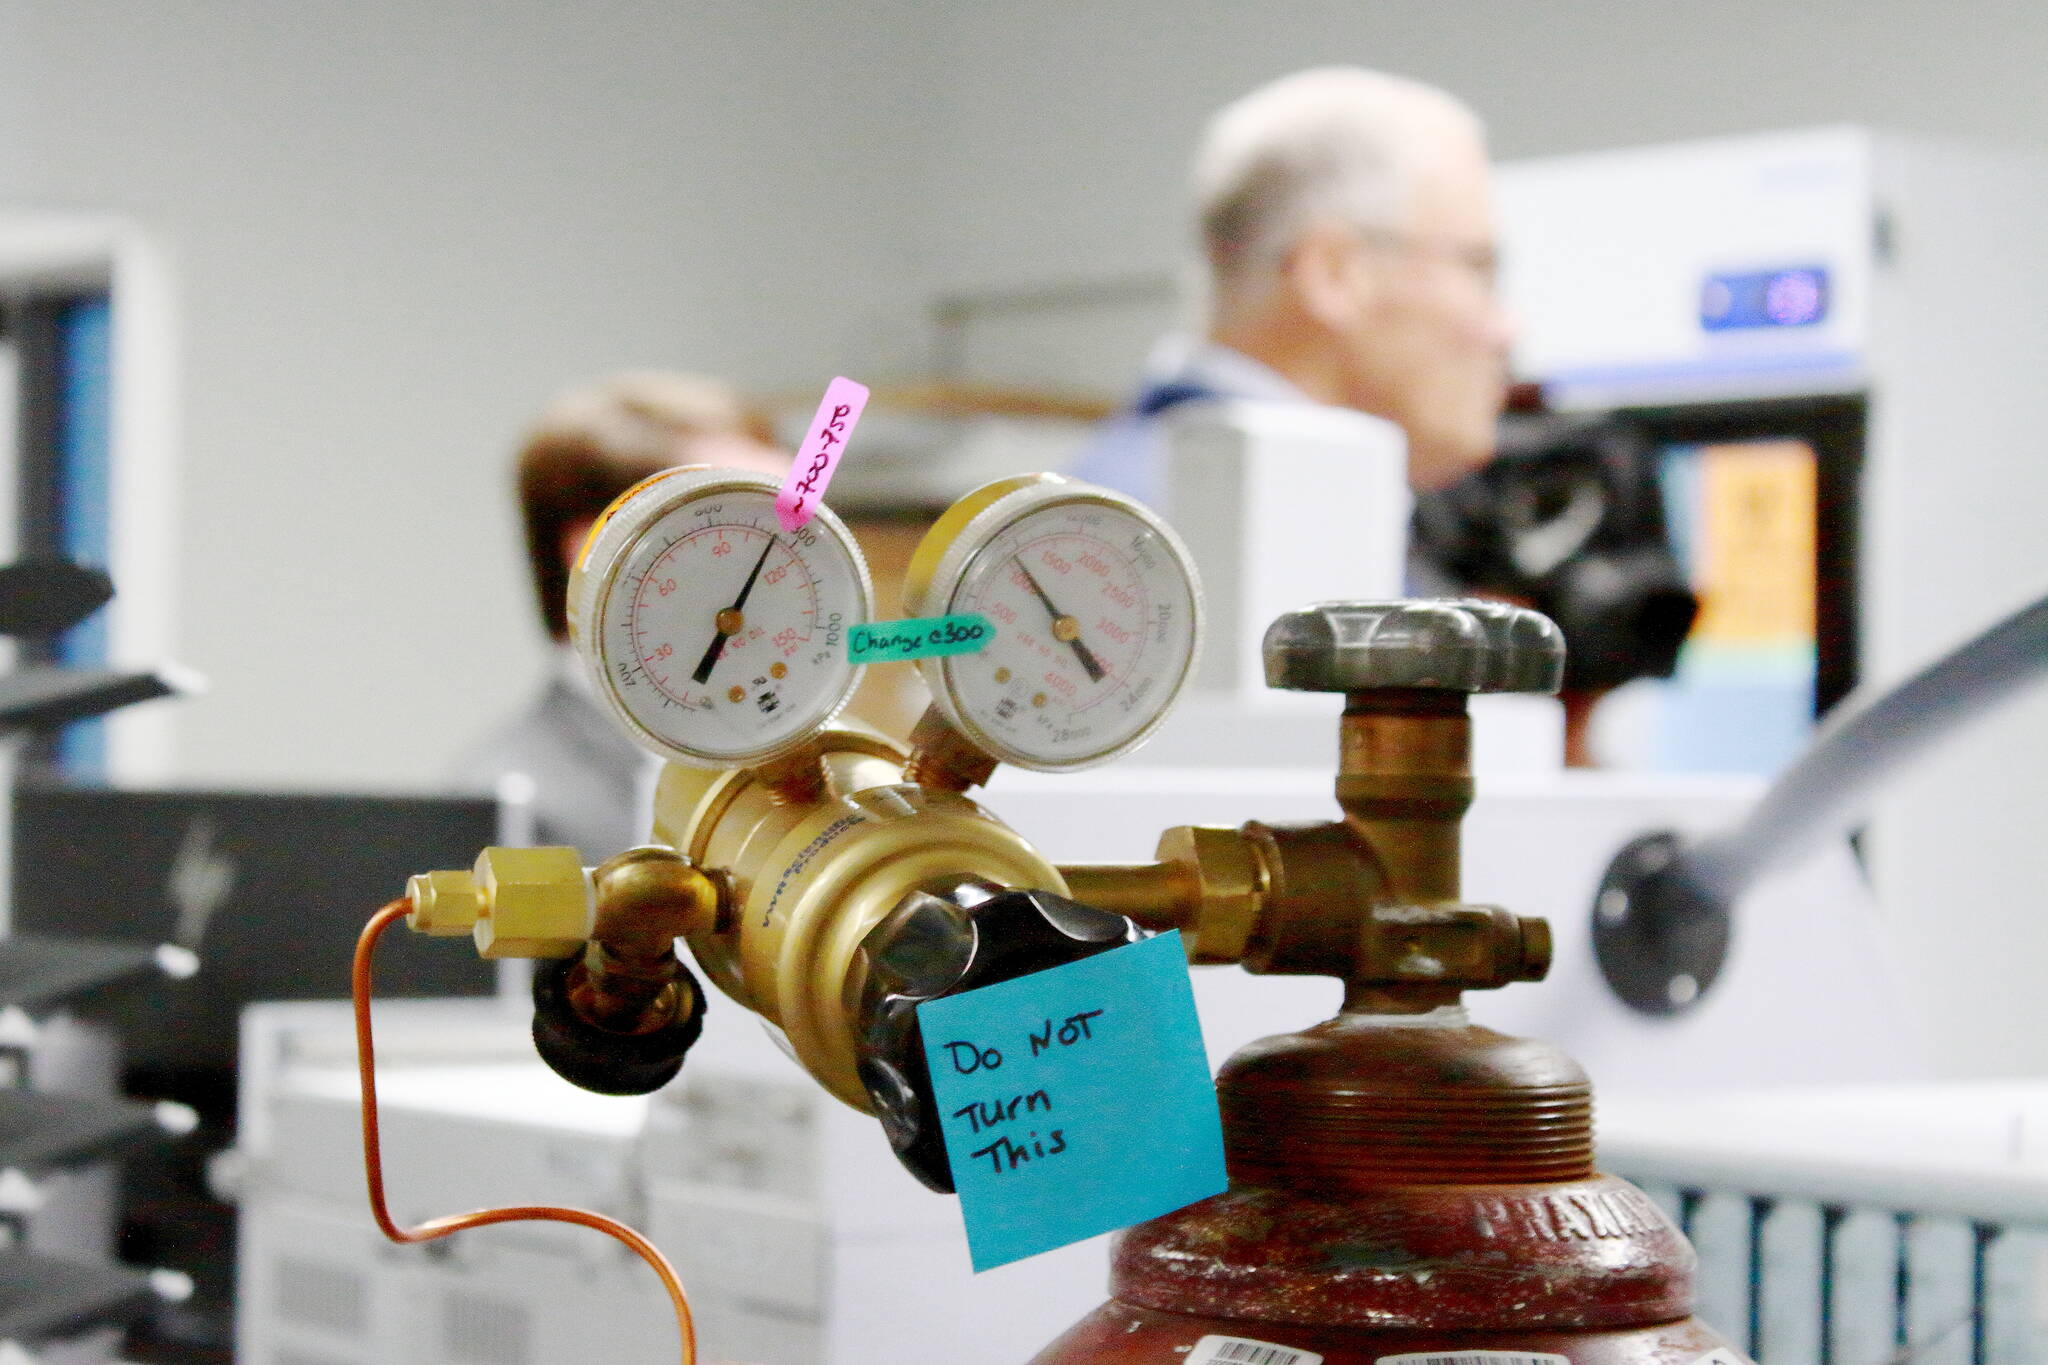 A sticky note reminds the visiting guests not to touch any equipment or turn any knobs during the toxicology lab tour. Photo by Keelin Everly-Lang / The Reporter